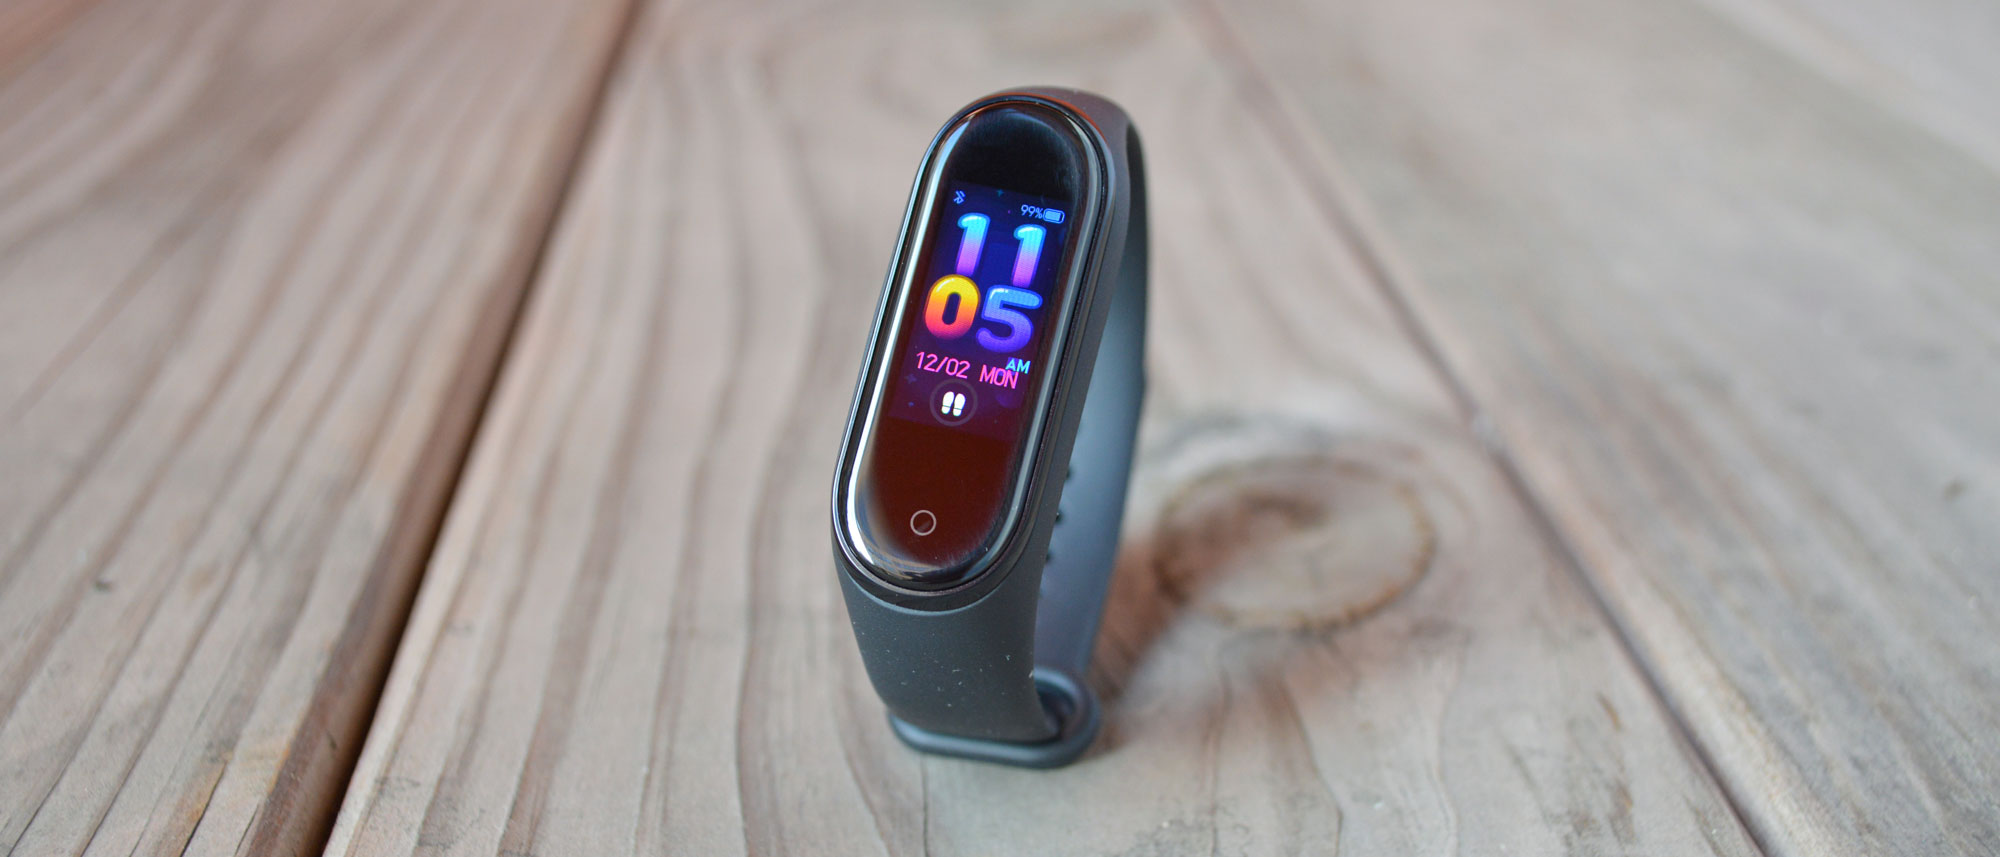 Xiaomi Mi Band 4 review: A $70 Fitbit rival with amazing battery life